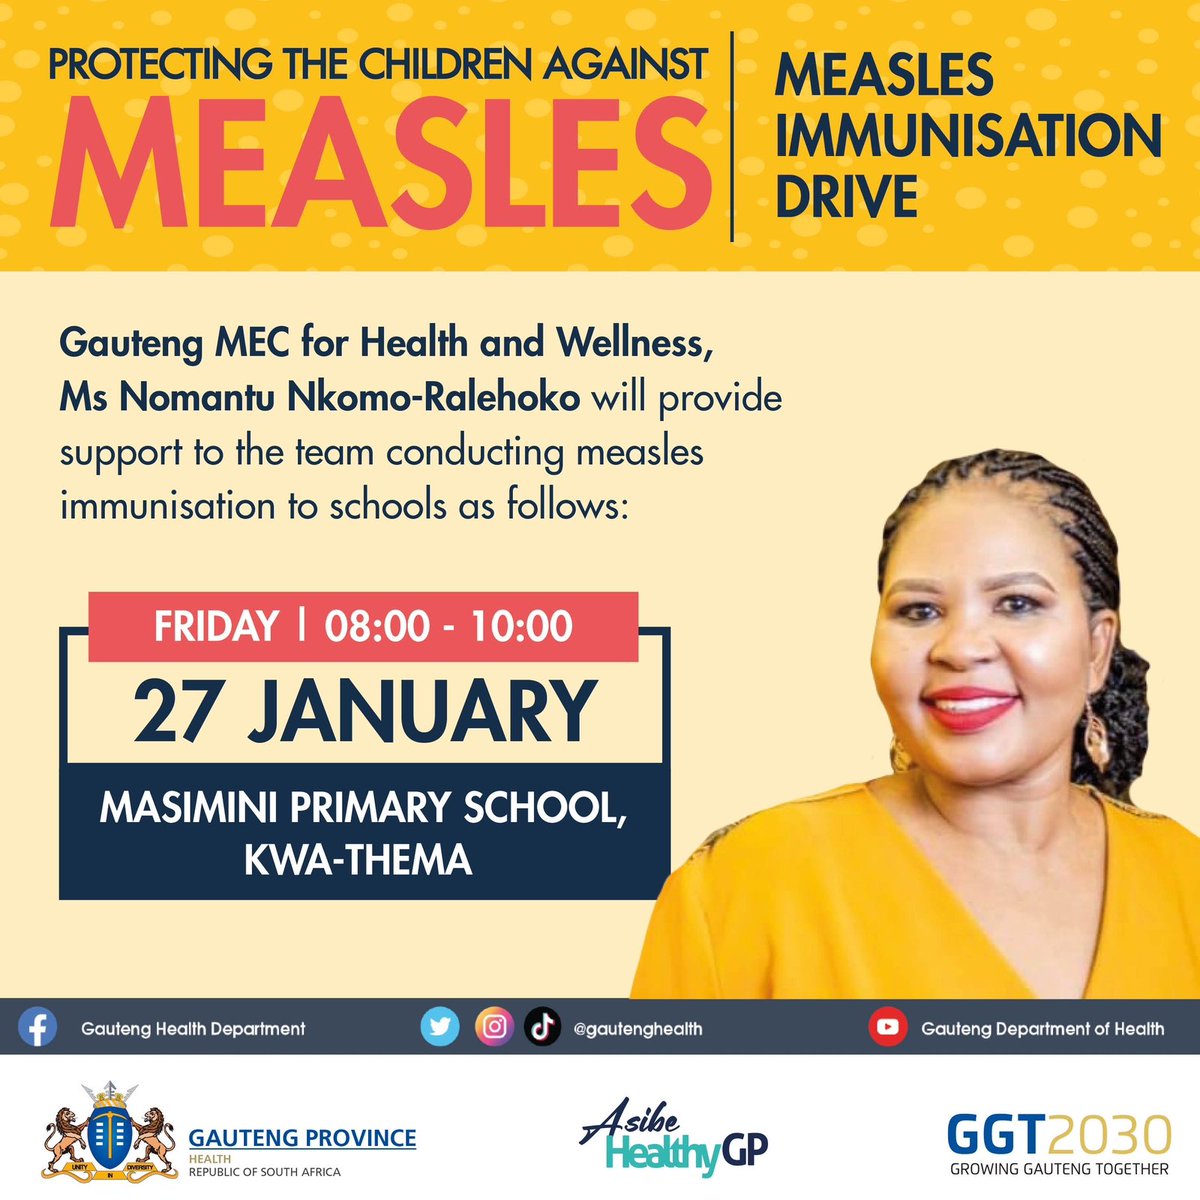 As part of the measles immunisation drive the Gauteng MEC for Health and Wellness, Ms Nomantu Nkomo-Ralehoko will provide support to the team conducting measles immunisation to schools in Kwa-Thema on Friday, 27 January 2023.

#GPBacktoSchool
#MeaslesOutbreak
#AsibeHealthyGP